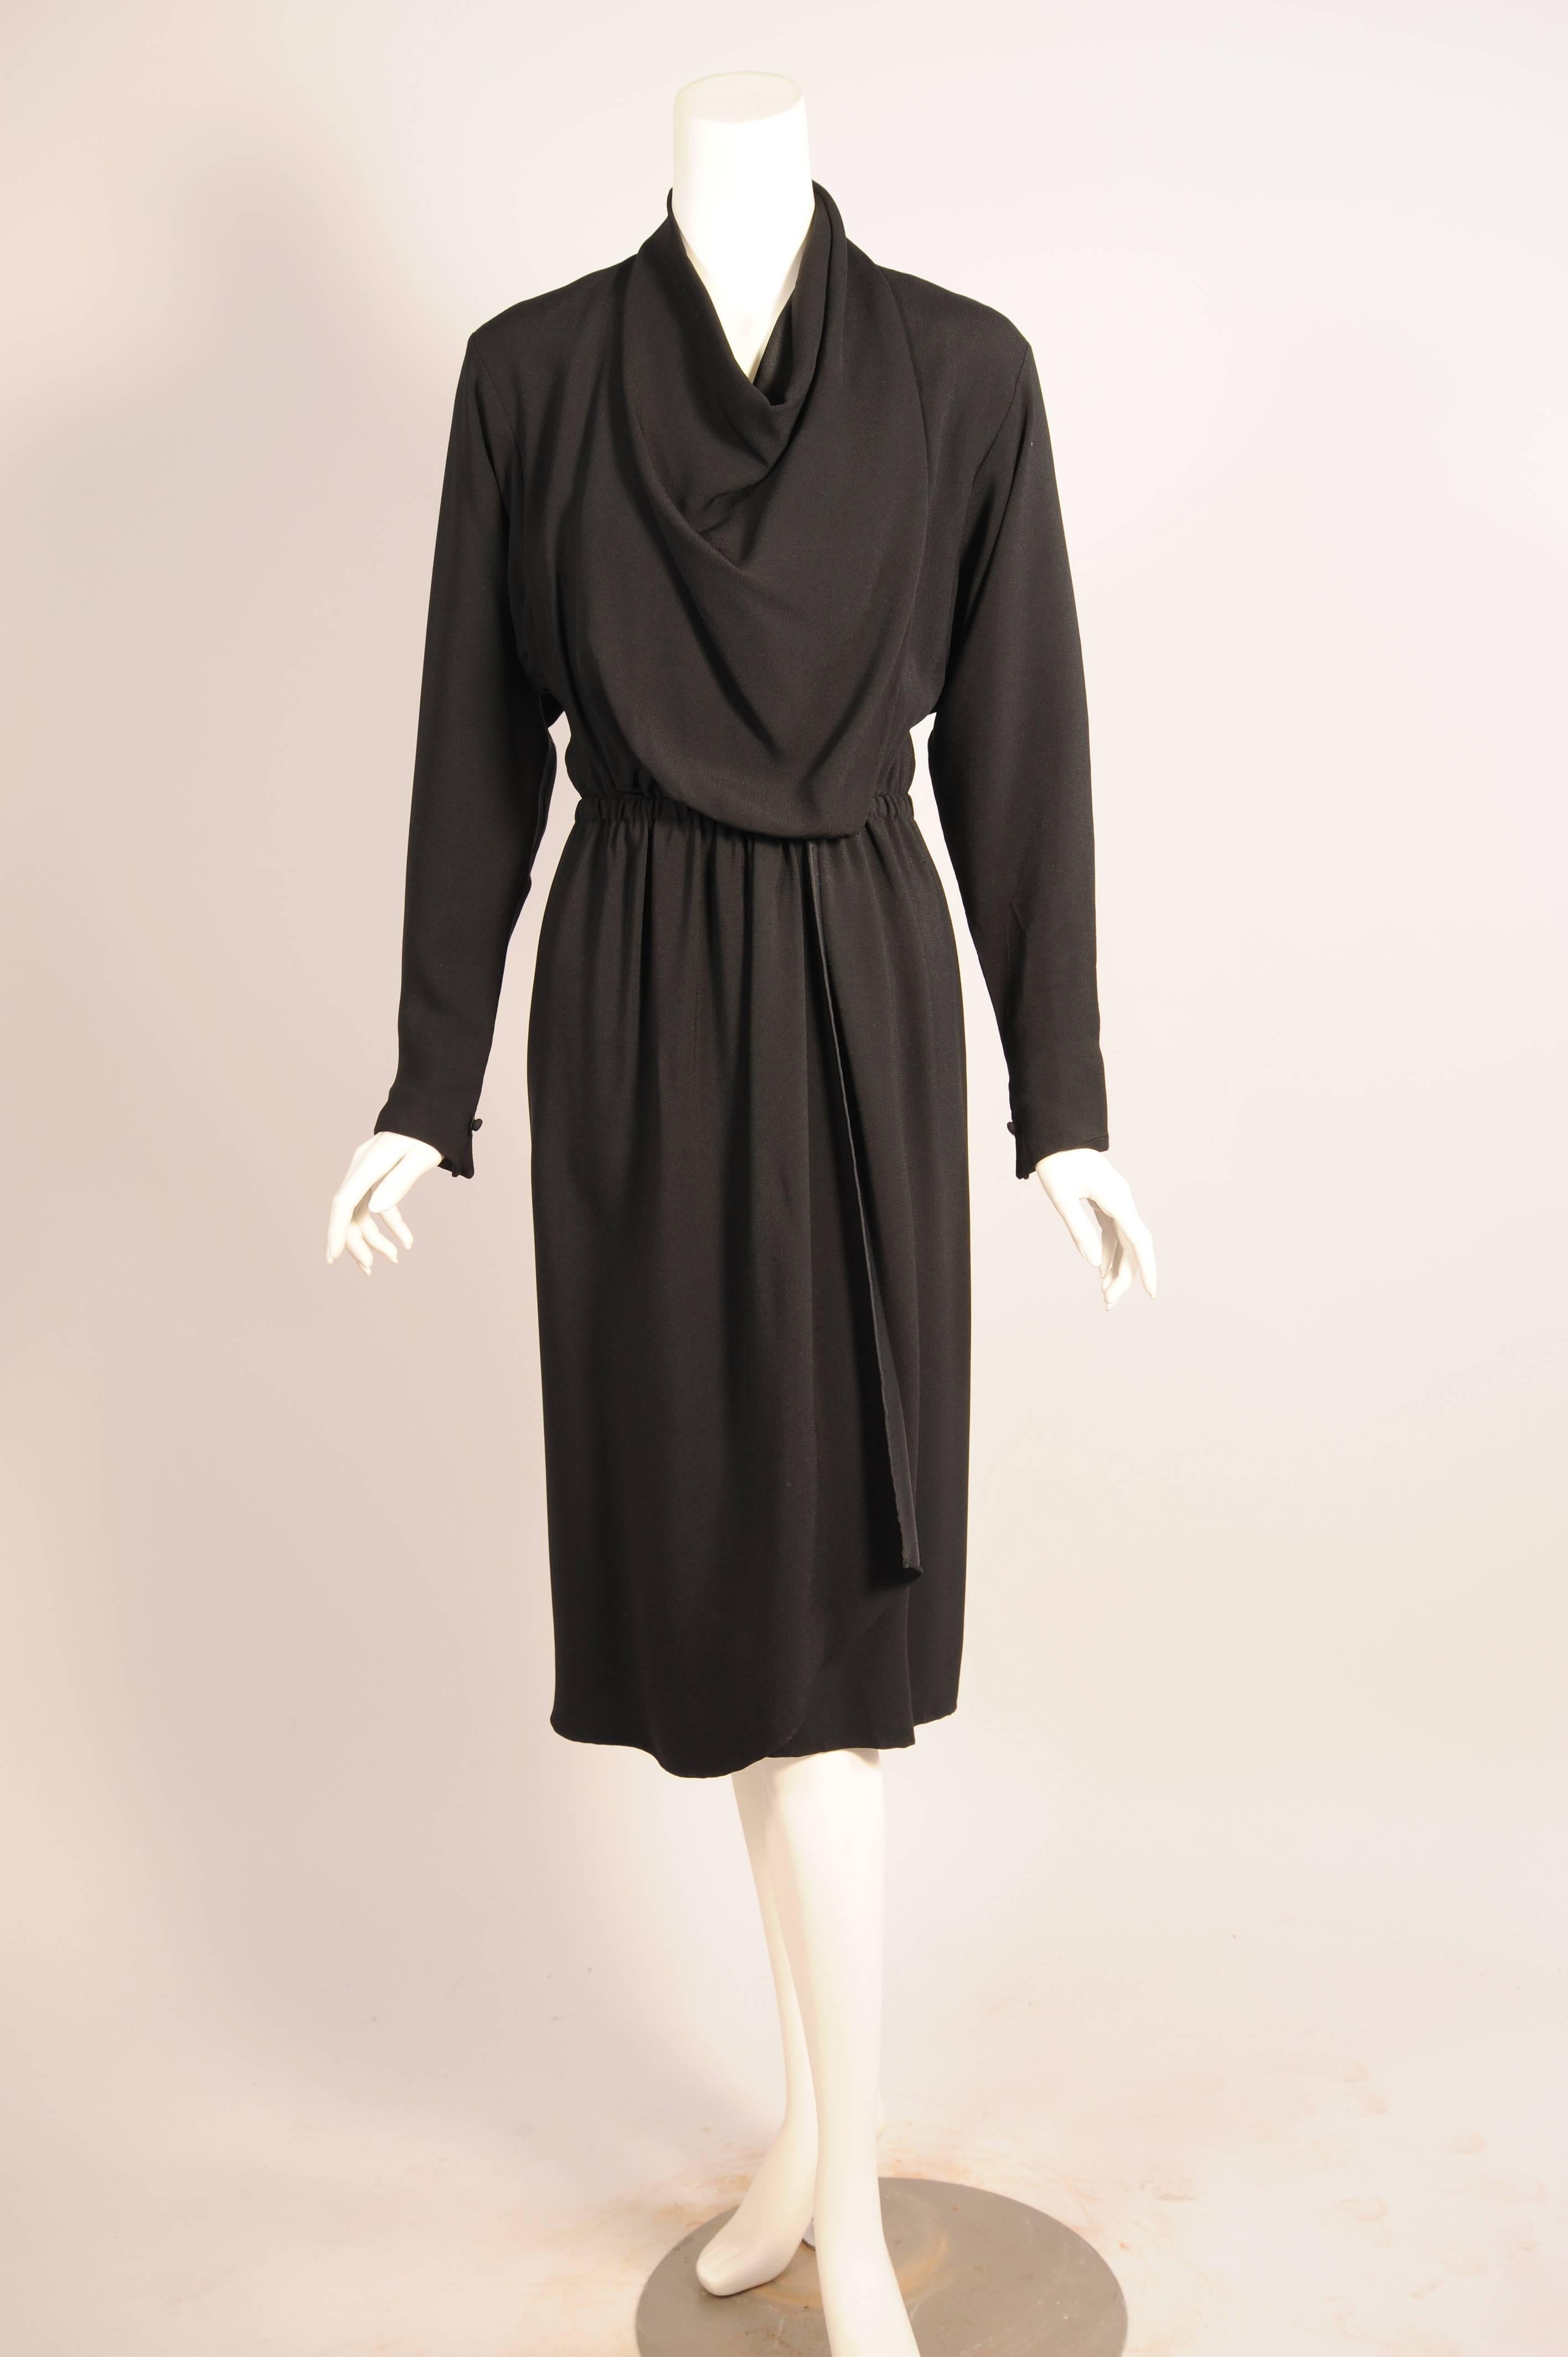 This sleek wrap dress closes to the left of center front while the draped bodice wraps around the neckline and closes to the right of center with a button and loop closure creating a beautiful drape. The long sleeves have a matching button and loop